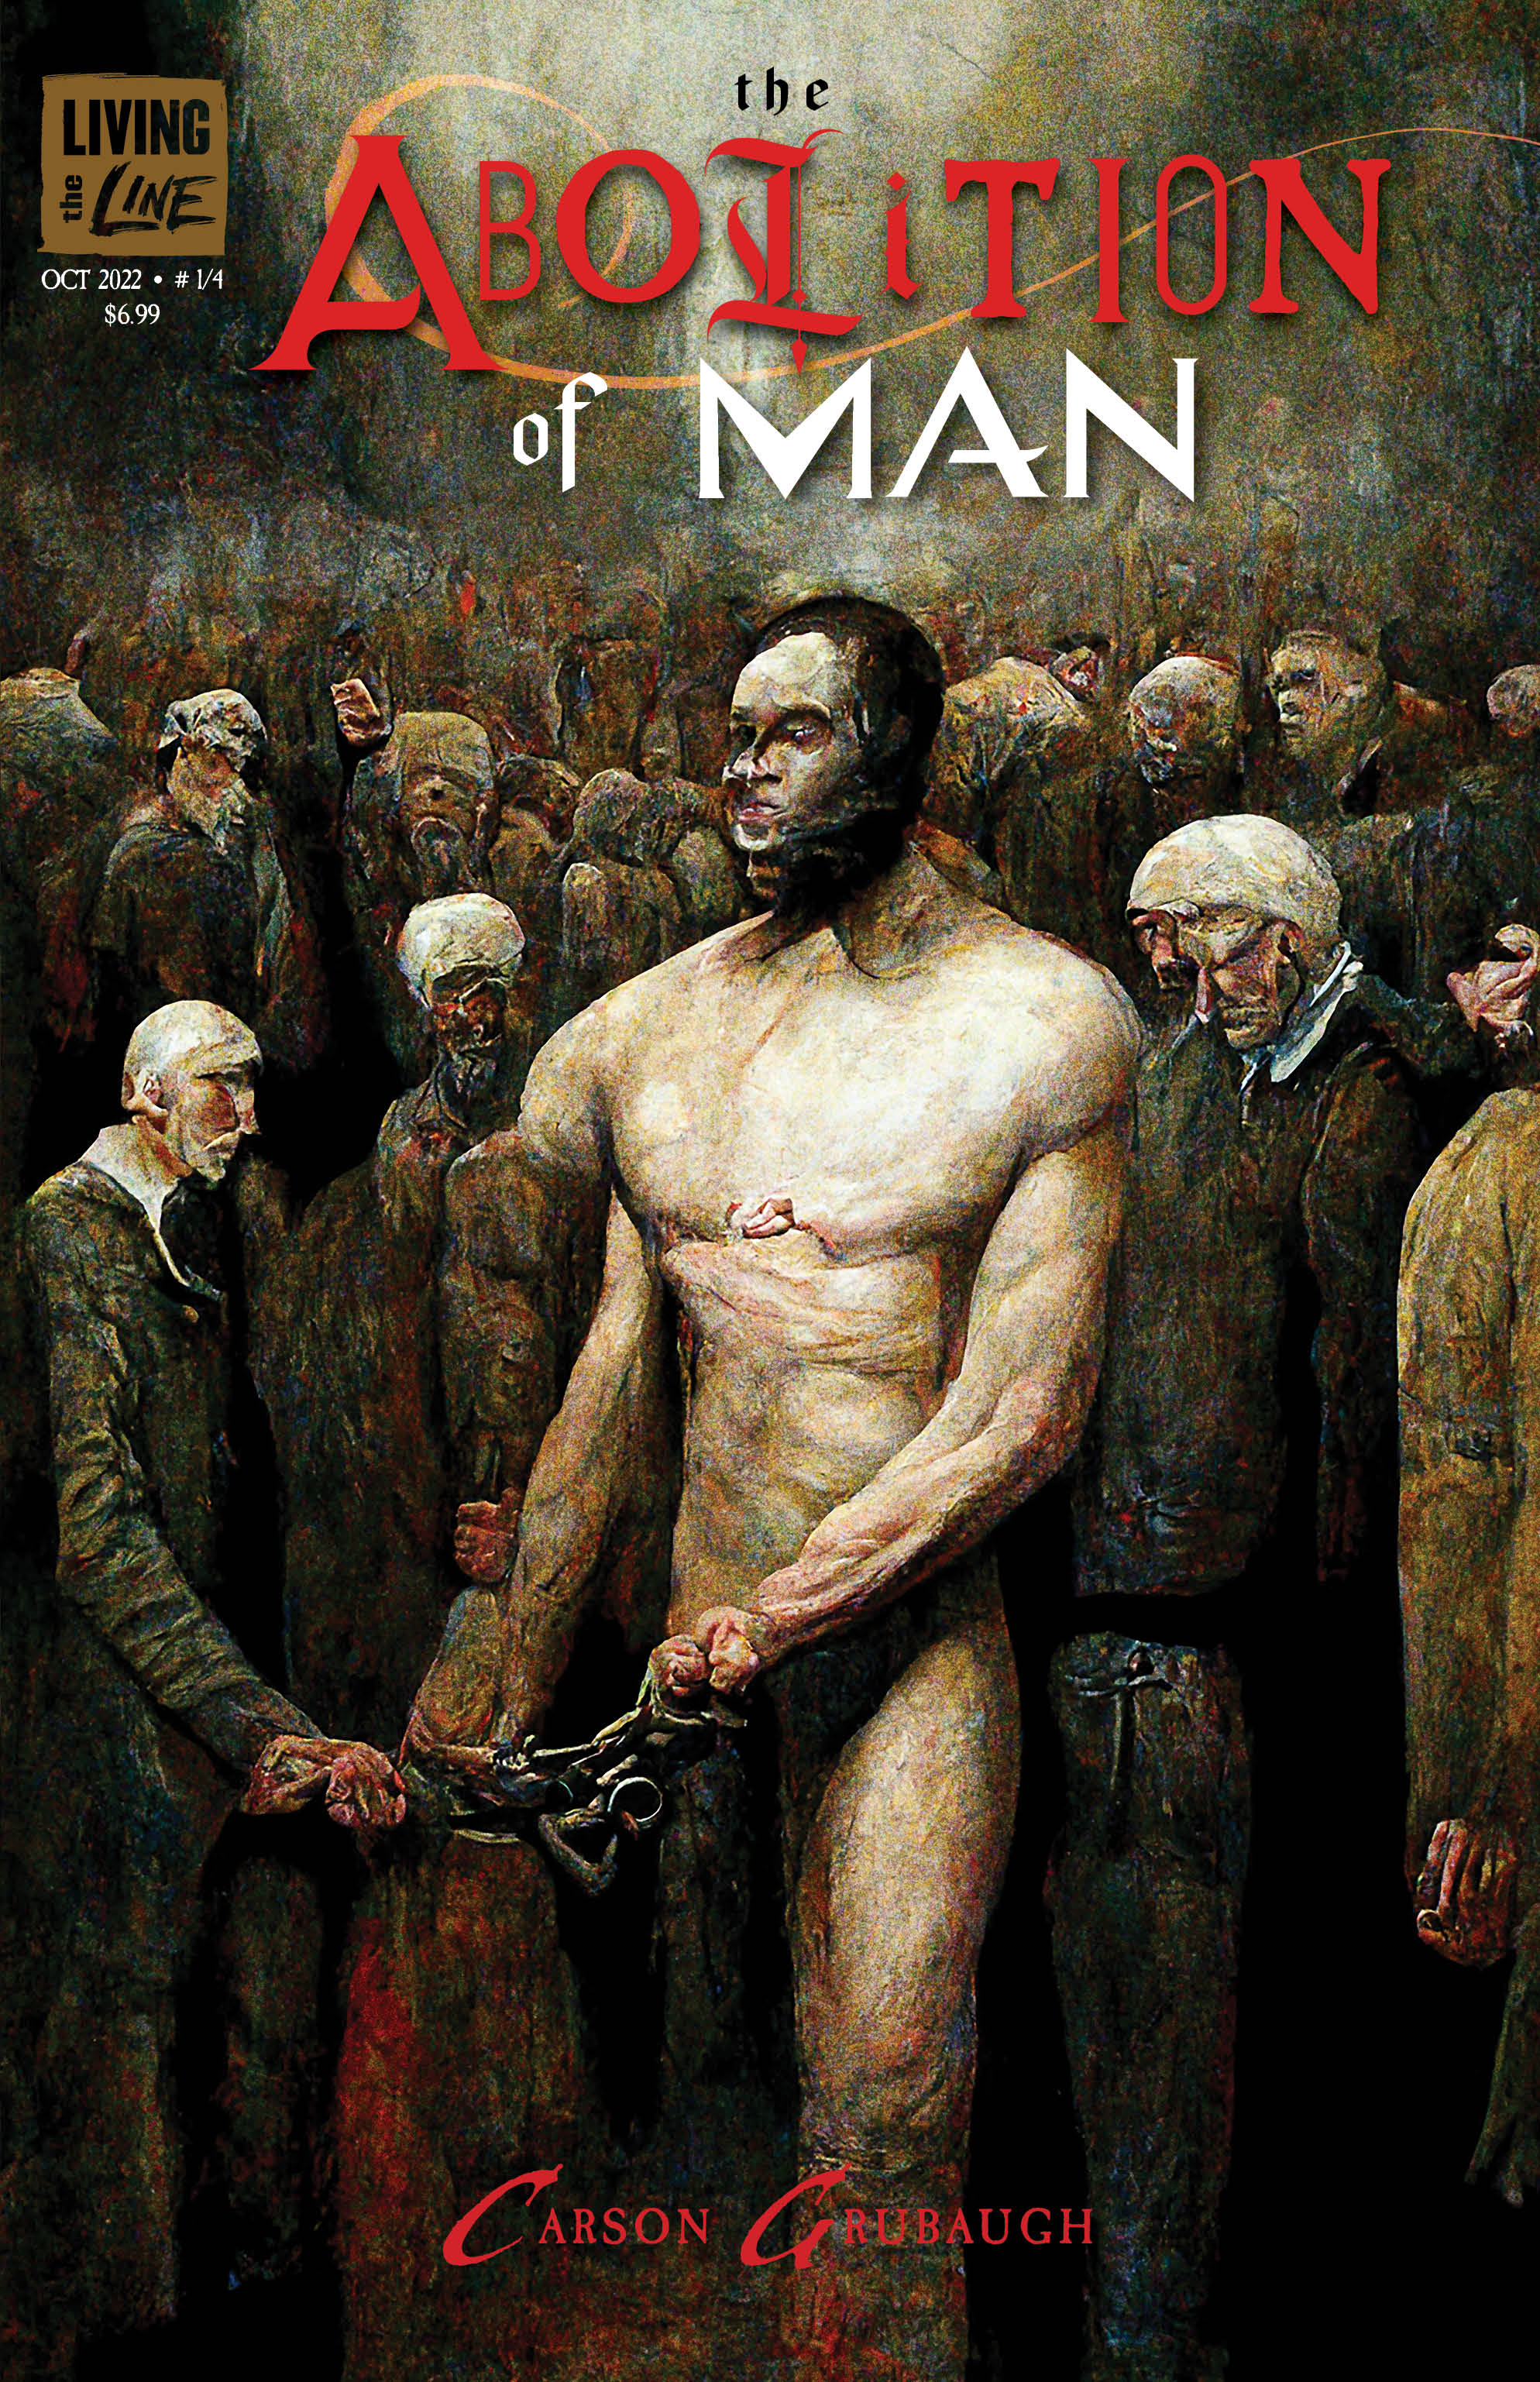 The Abolition of Man, cover